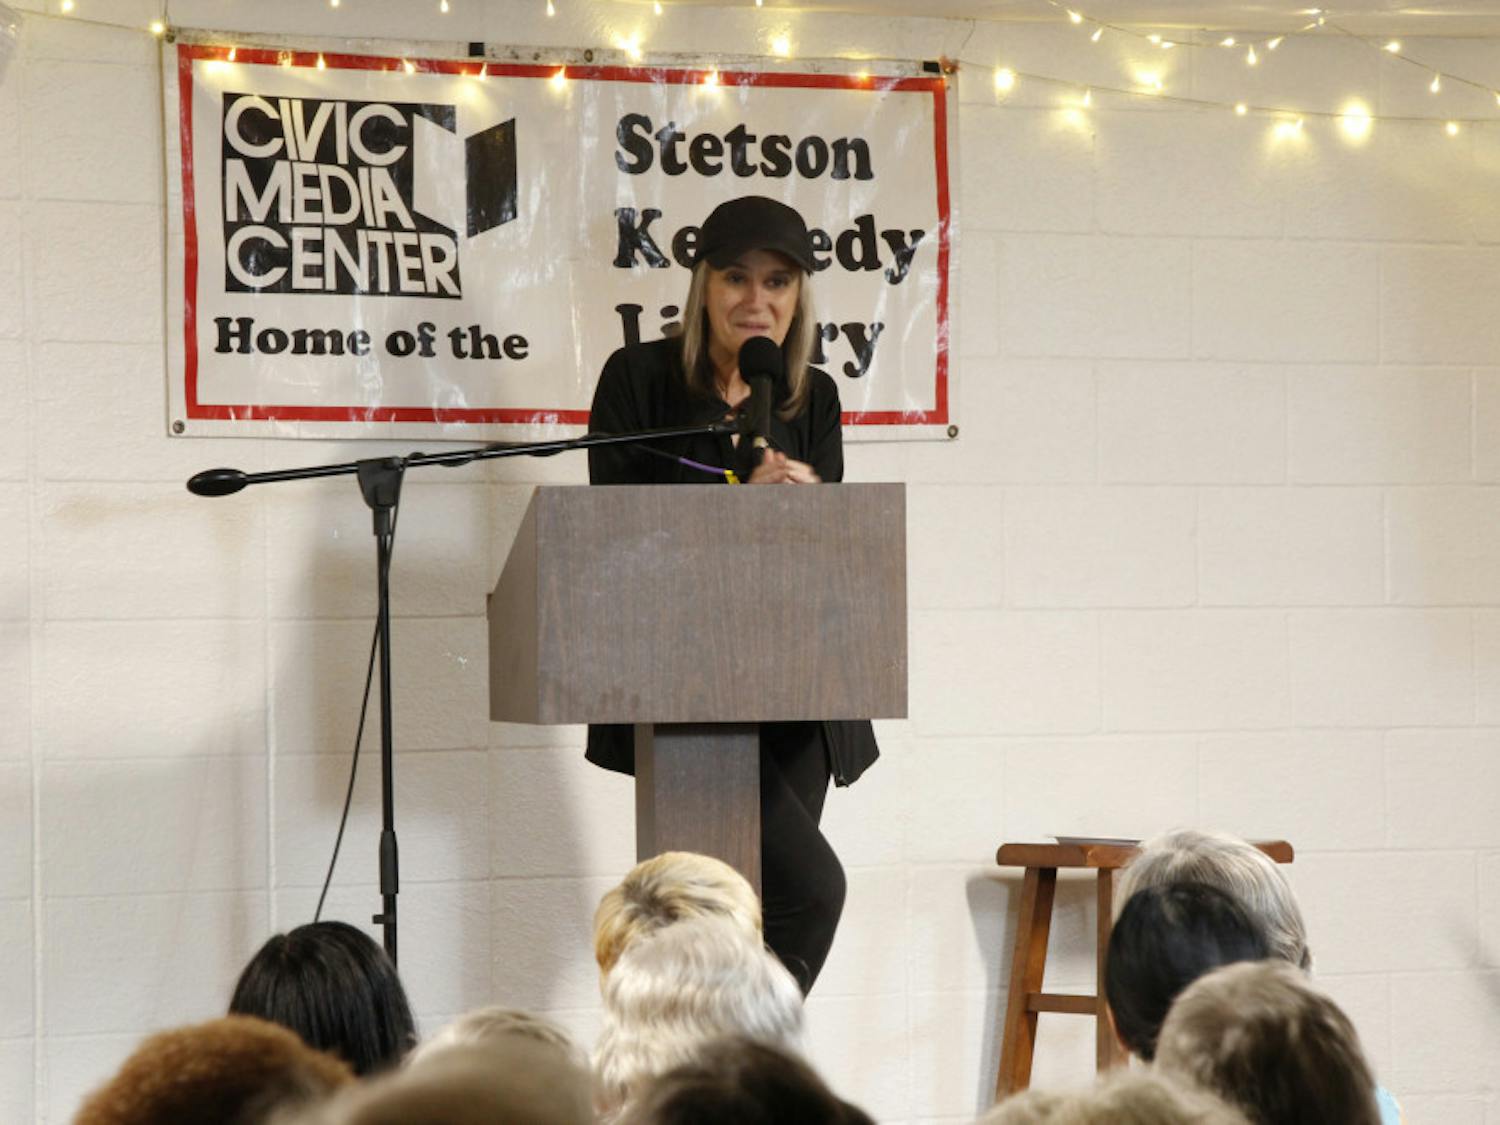 Amy Goodman spoke before an estimated audience of 250 people at Working Food Community Center Friday, Oct. 19, 2018. The event was held to celebrate the Civic Media Center’s 25th Anniversary.